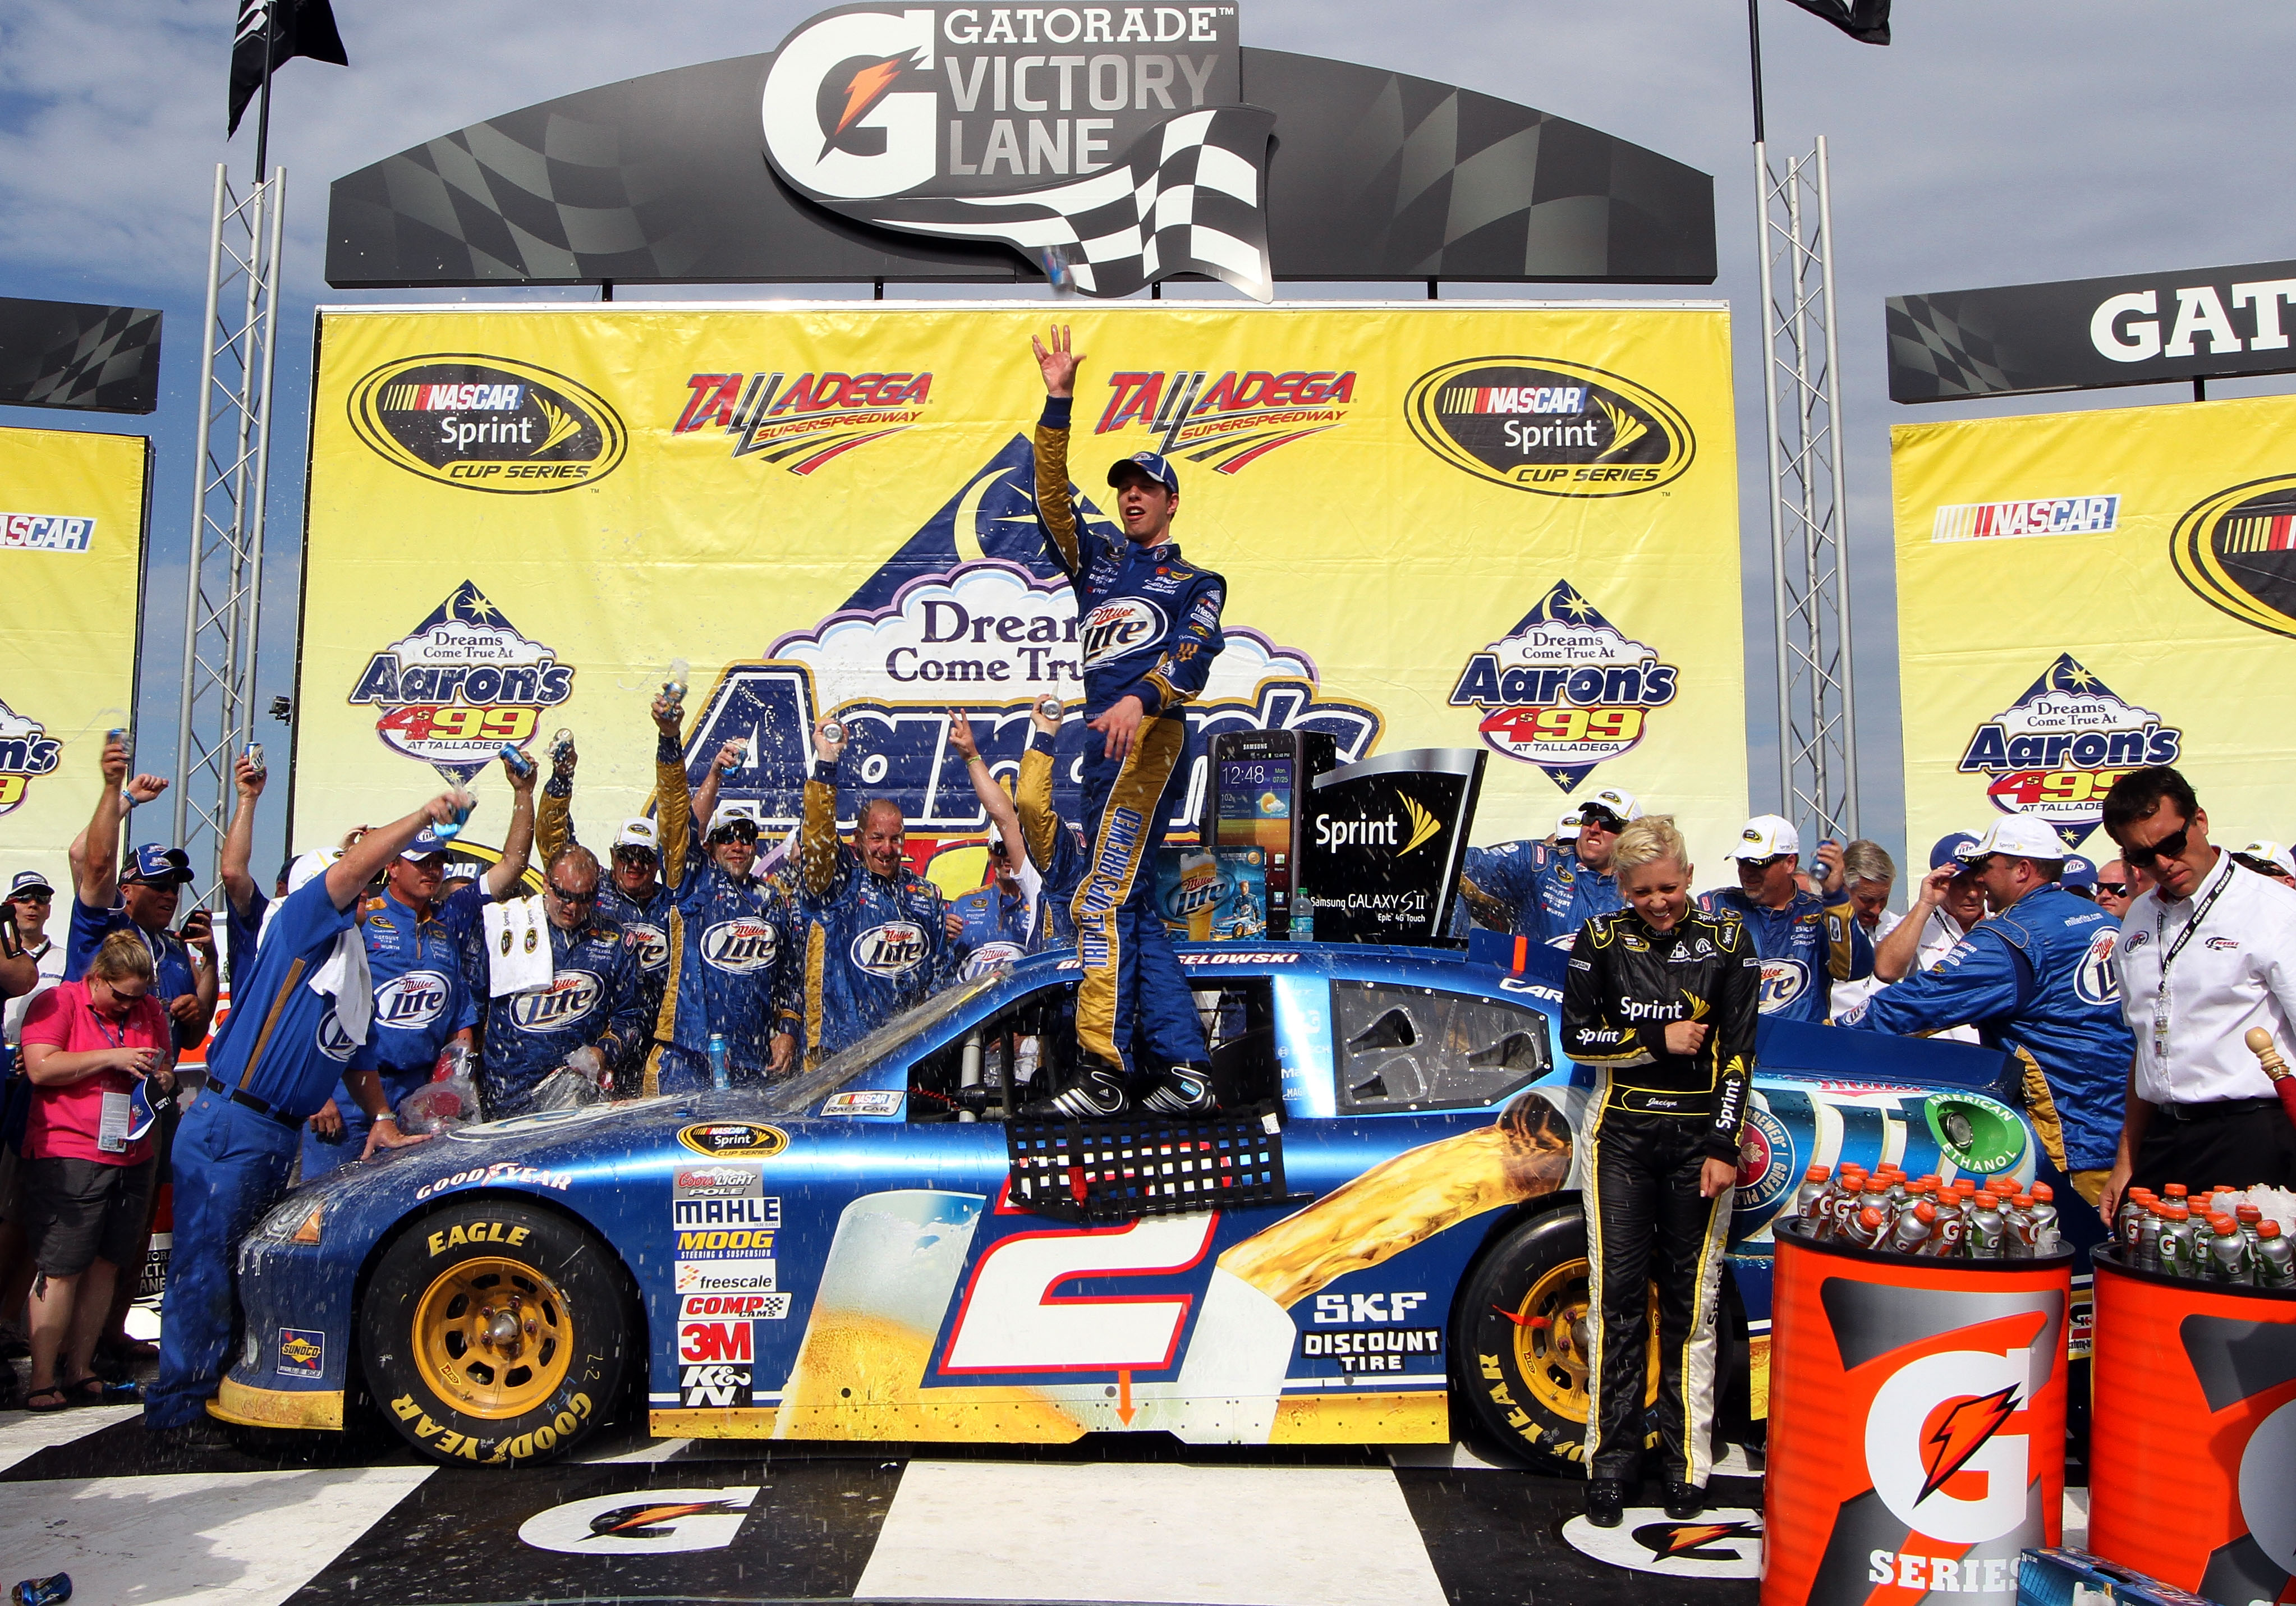 Survival was the name of the game in the late stages at Talladega.  The one who made it to victory lane was Brad Keselowski, his second win of 2012.